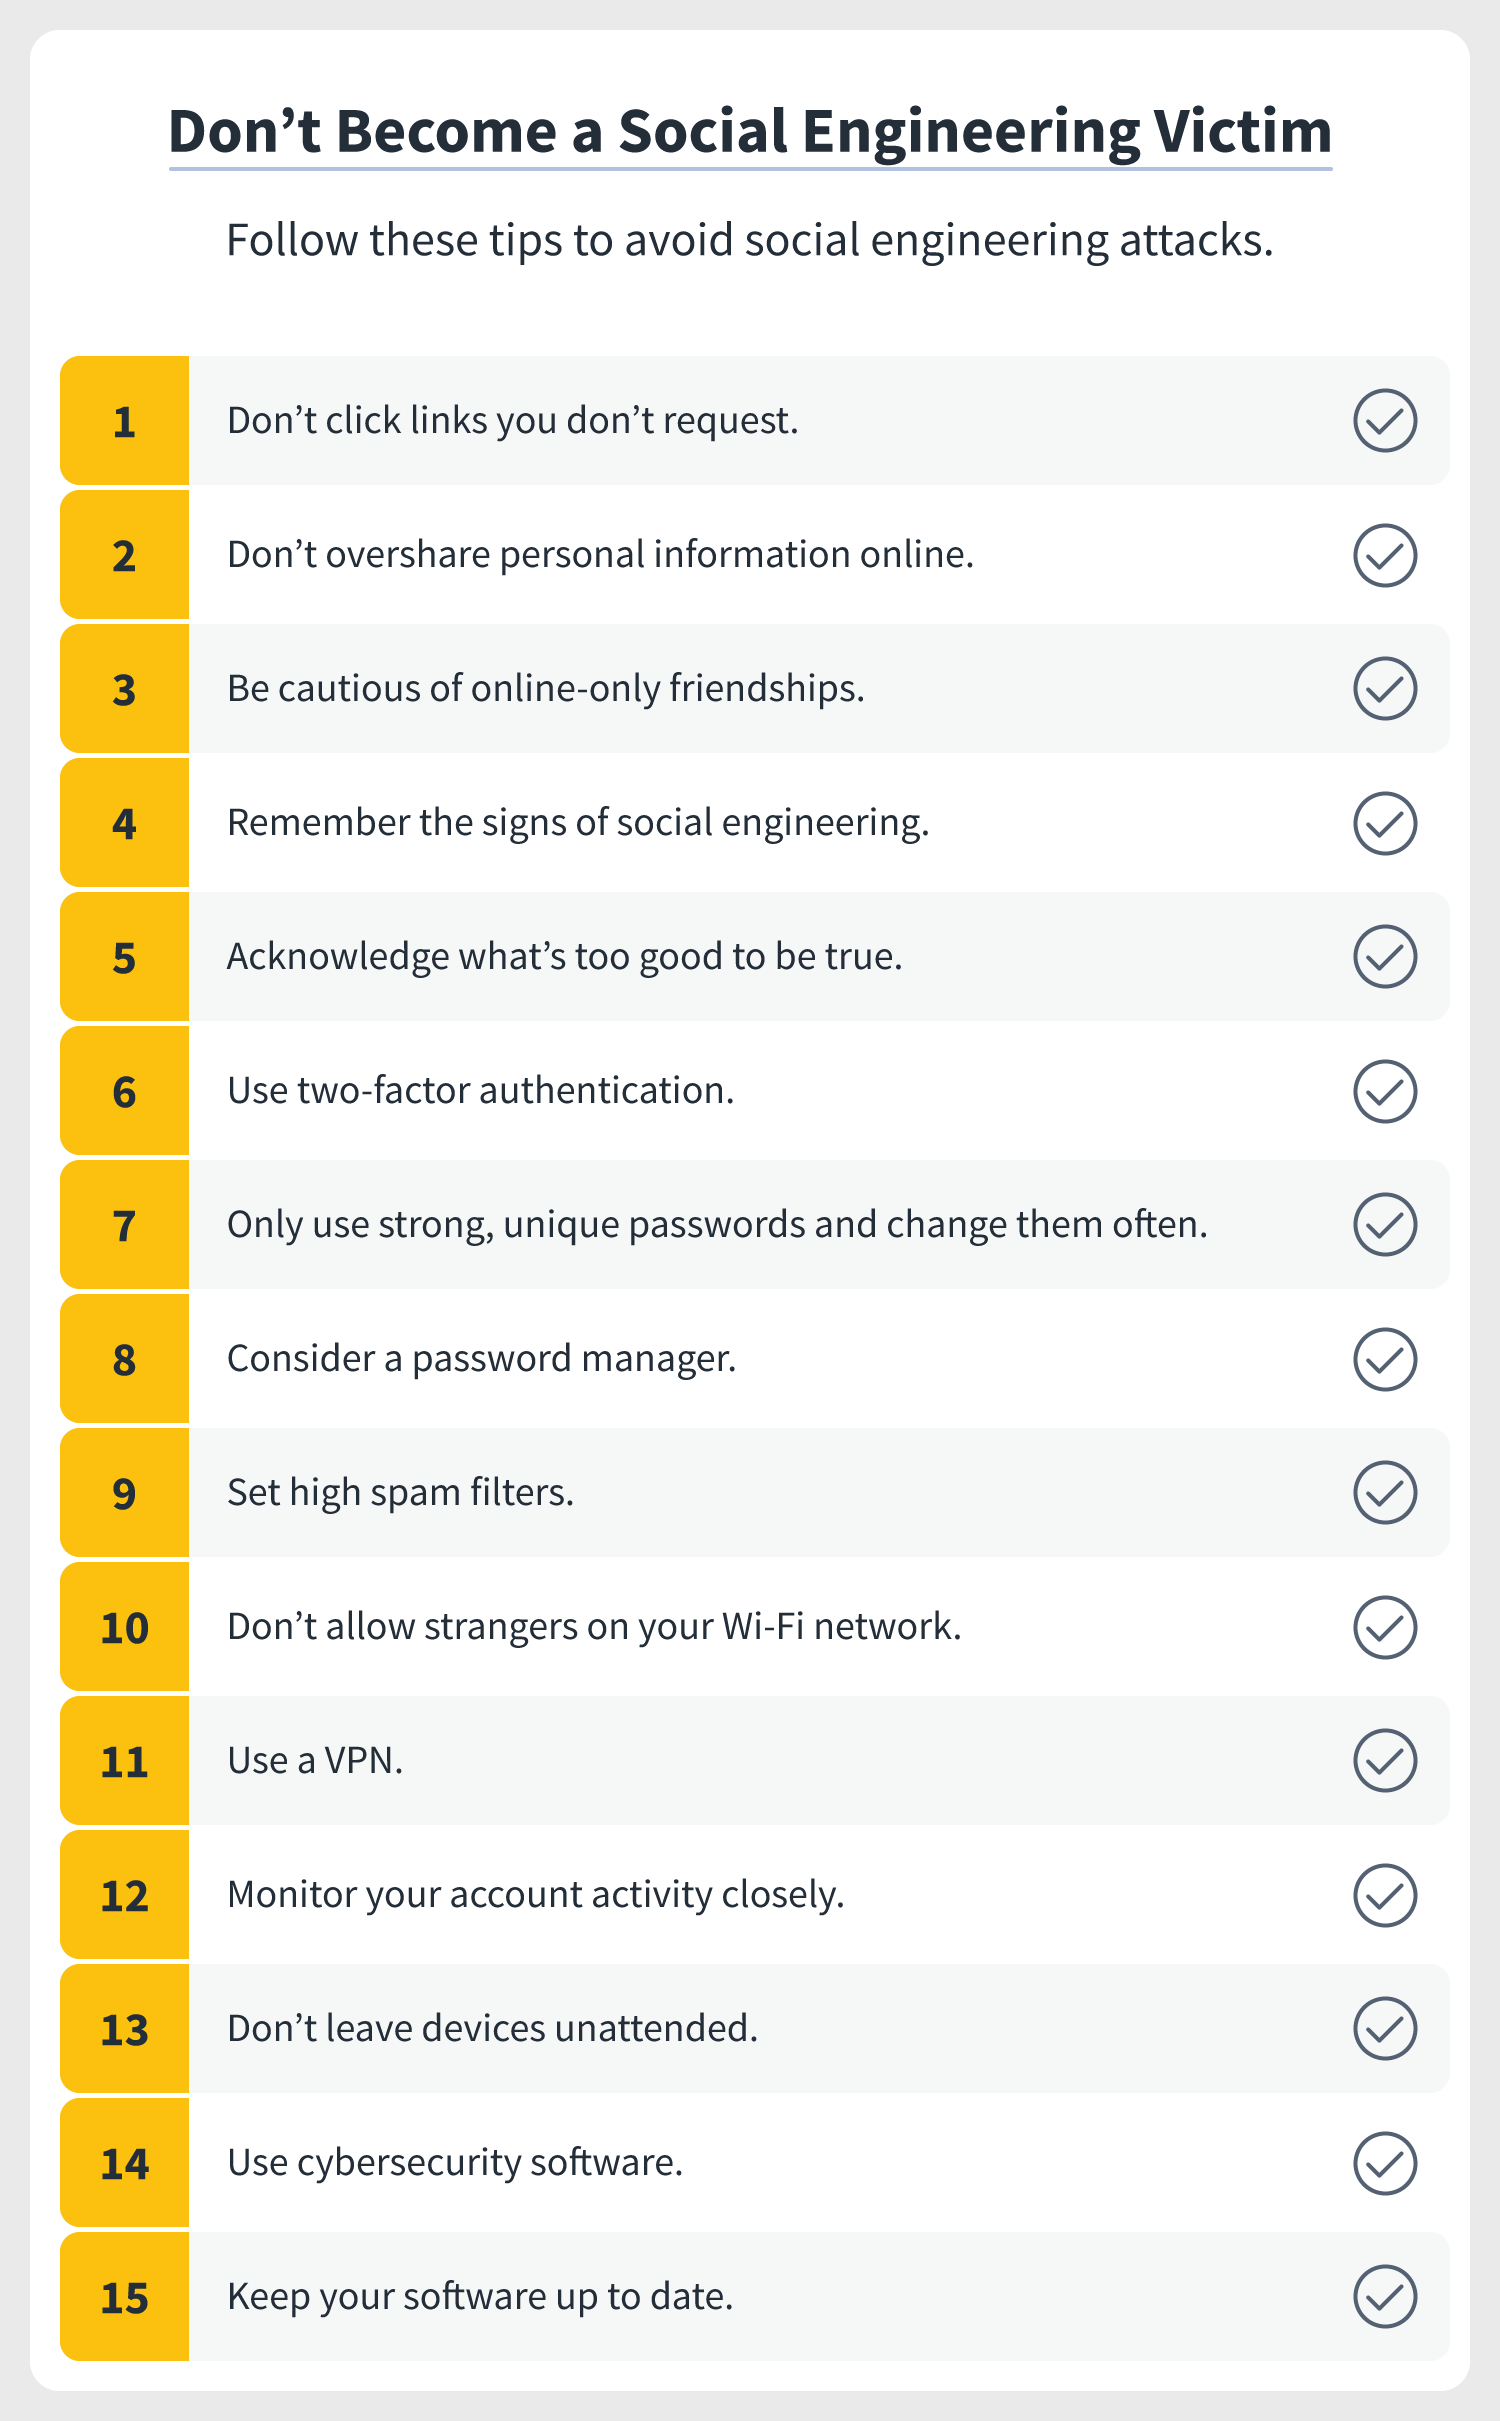 A checklist overviews 15 tips to avoid becoming a social engineering victim